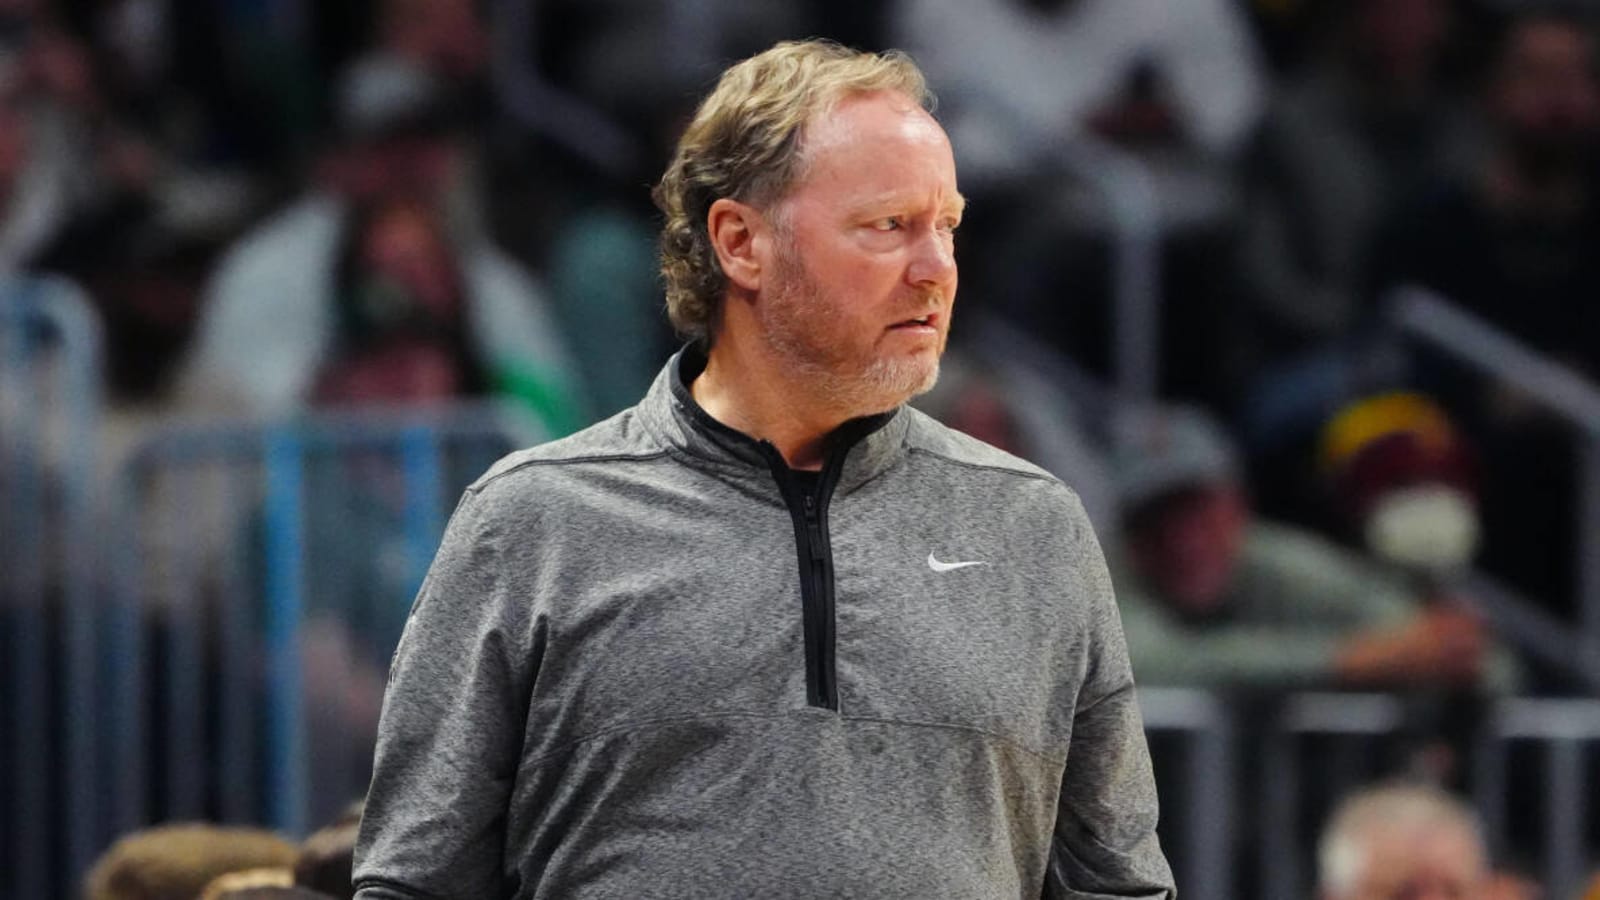 Mike Budenholzer Vows To Compete For Championships After Signing 5-Year Deal Worth Over $50 Million As Suns Head Coach